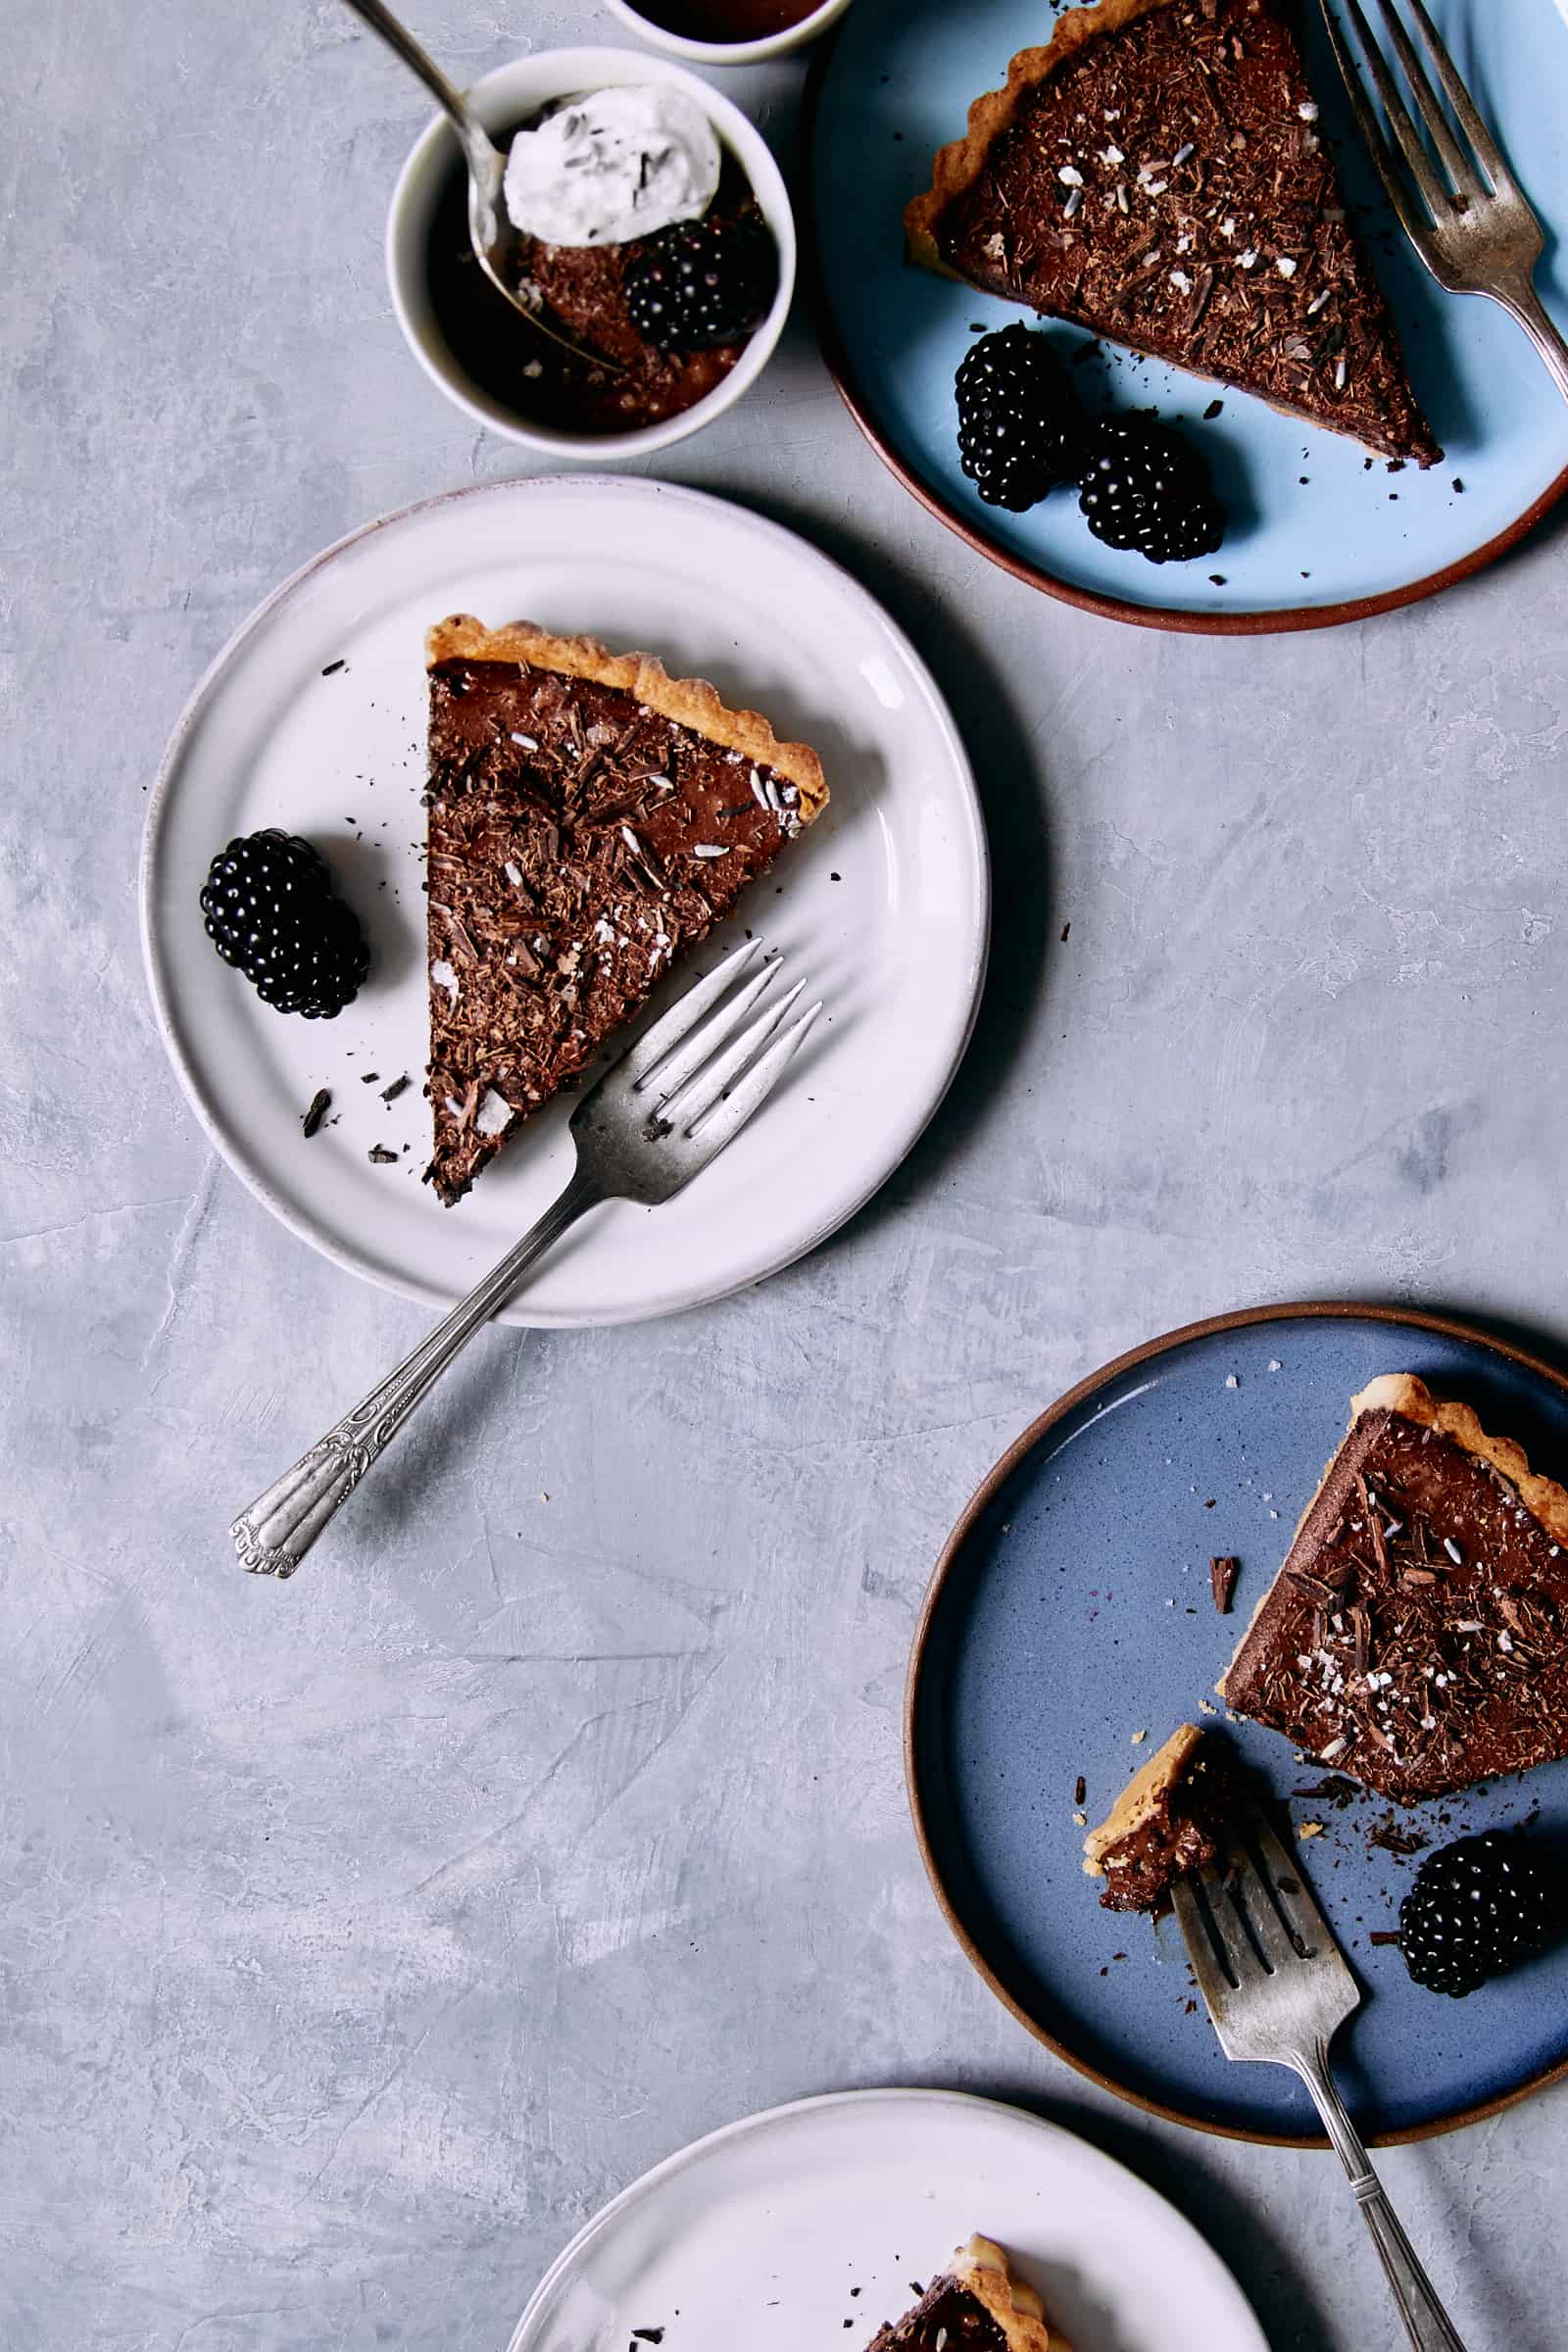 Sliced chocolate mousse tart with berries